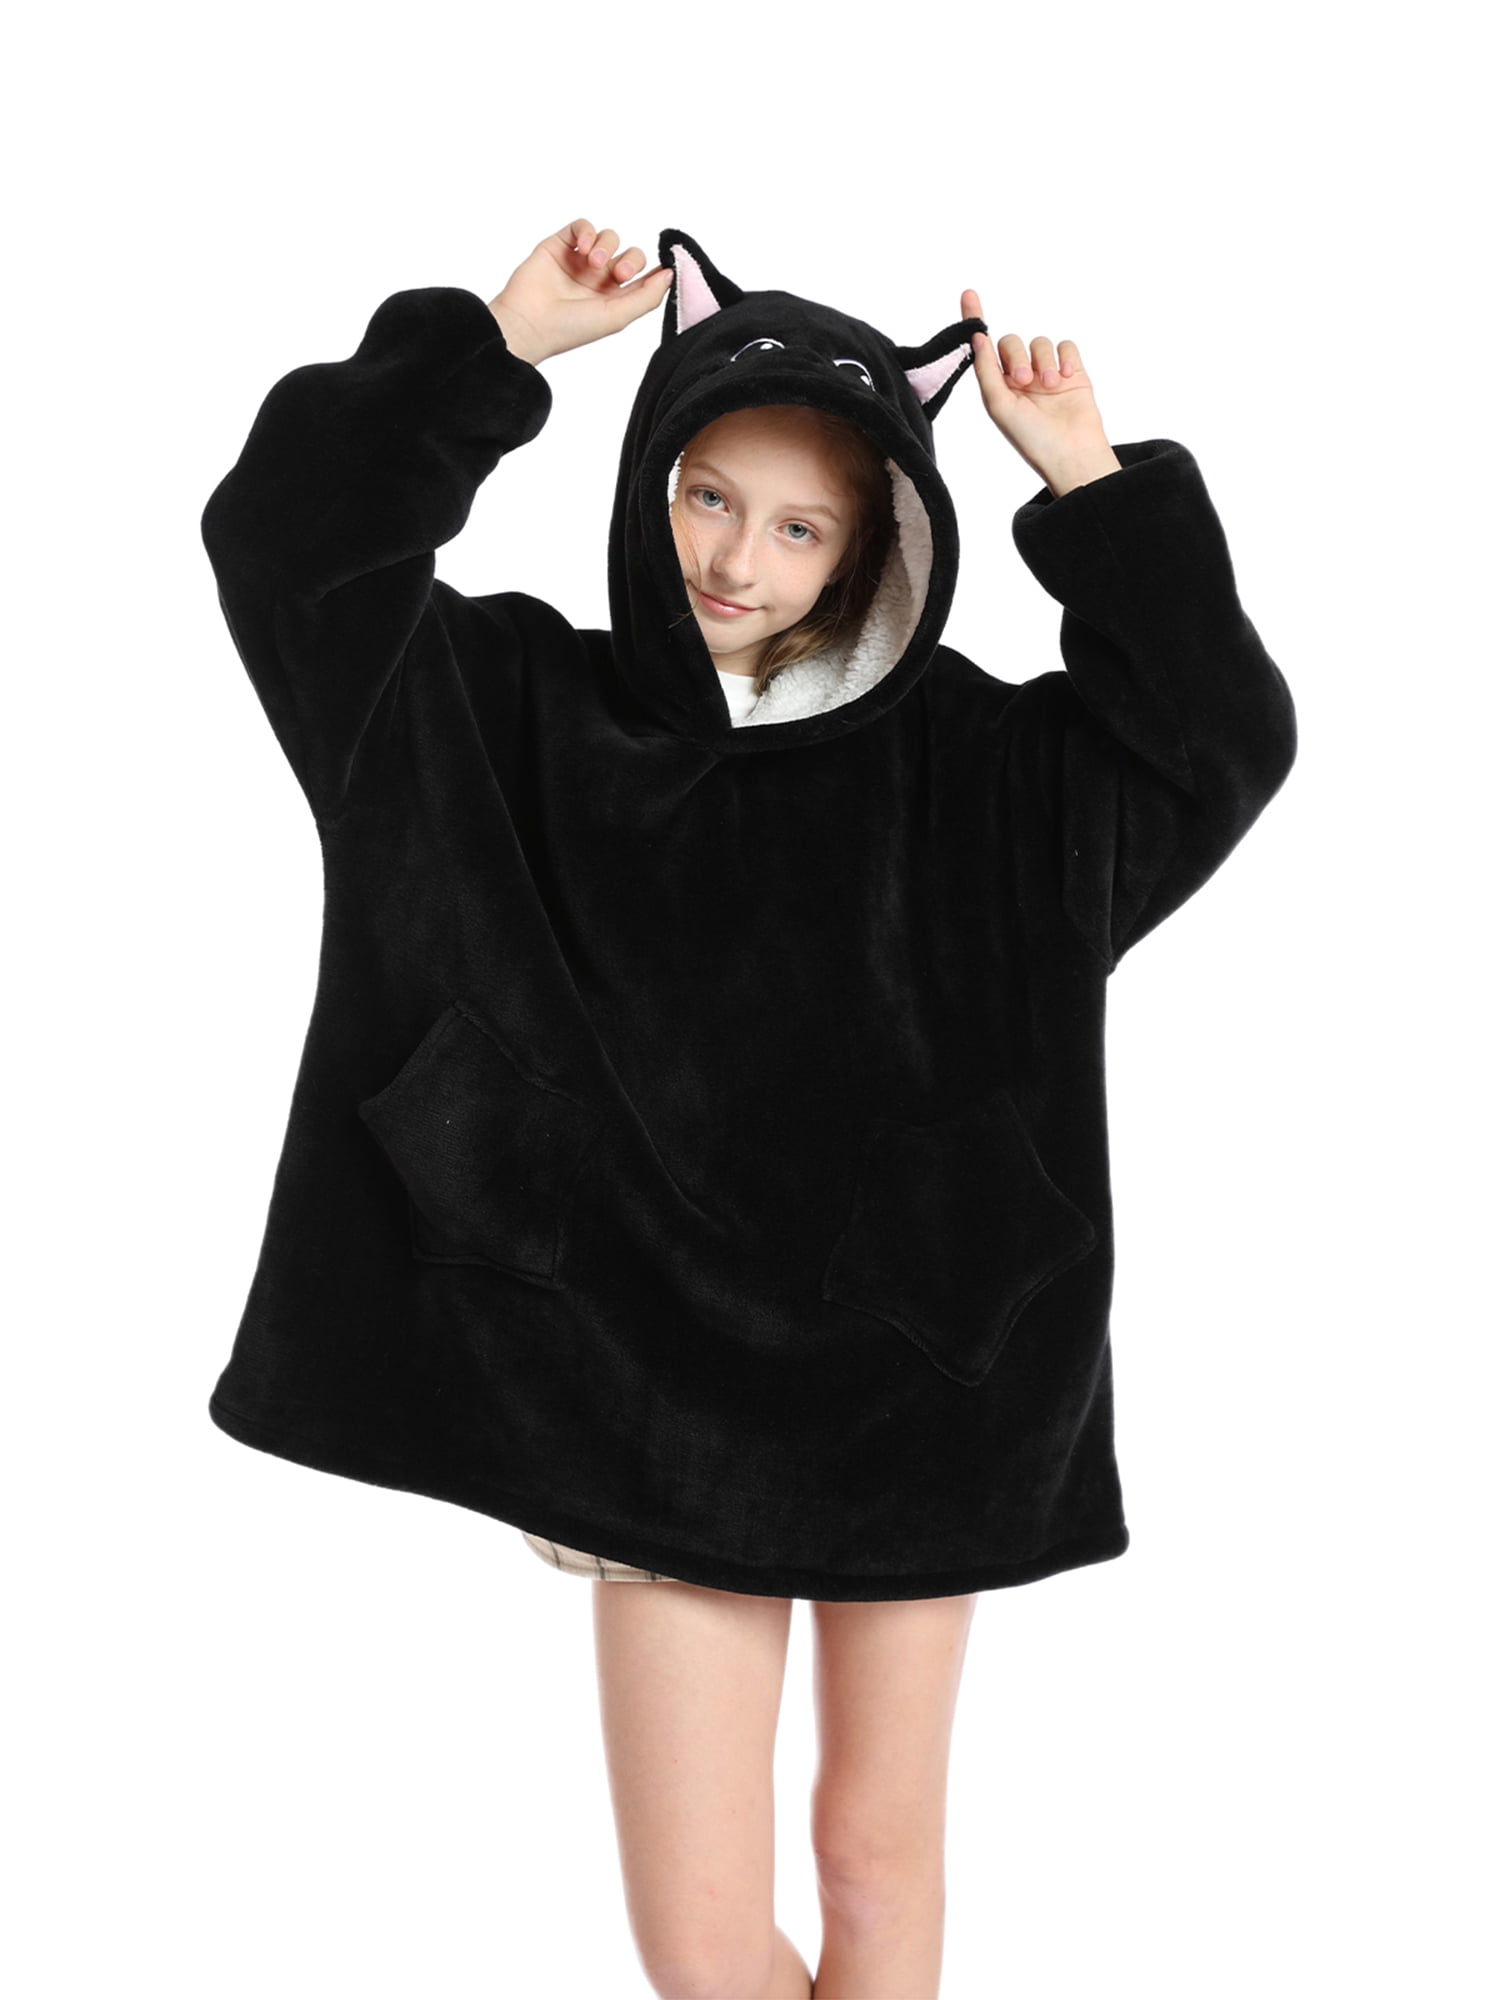 New Recommended Blanket Sweatshirt For Adults & Children 